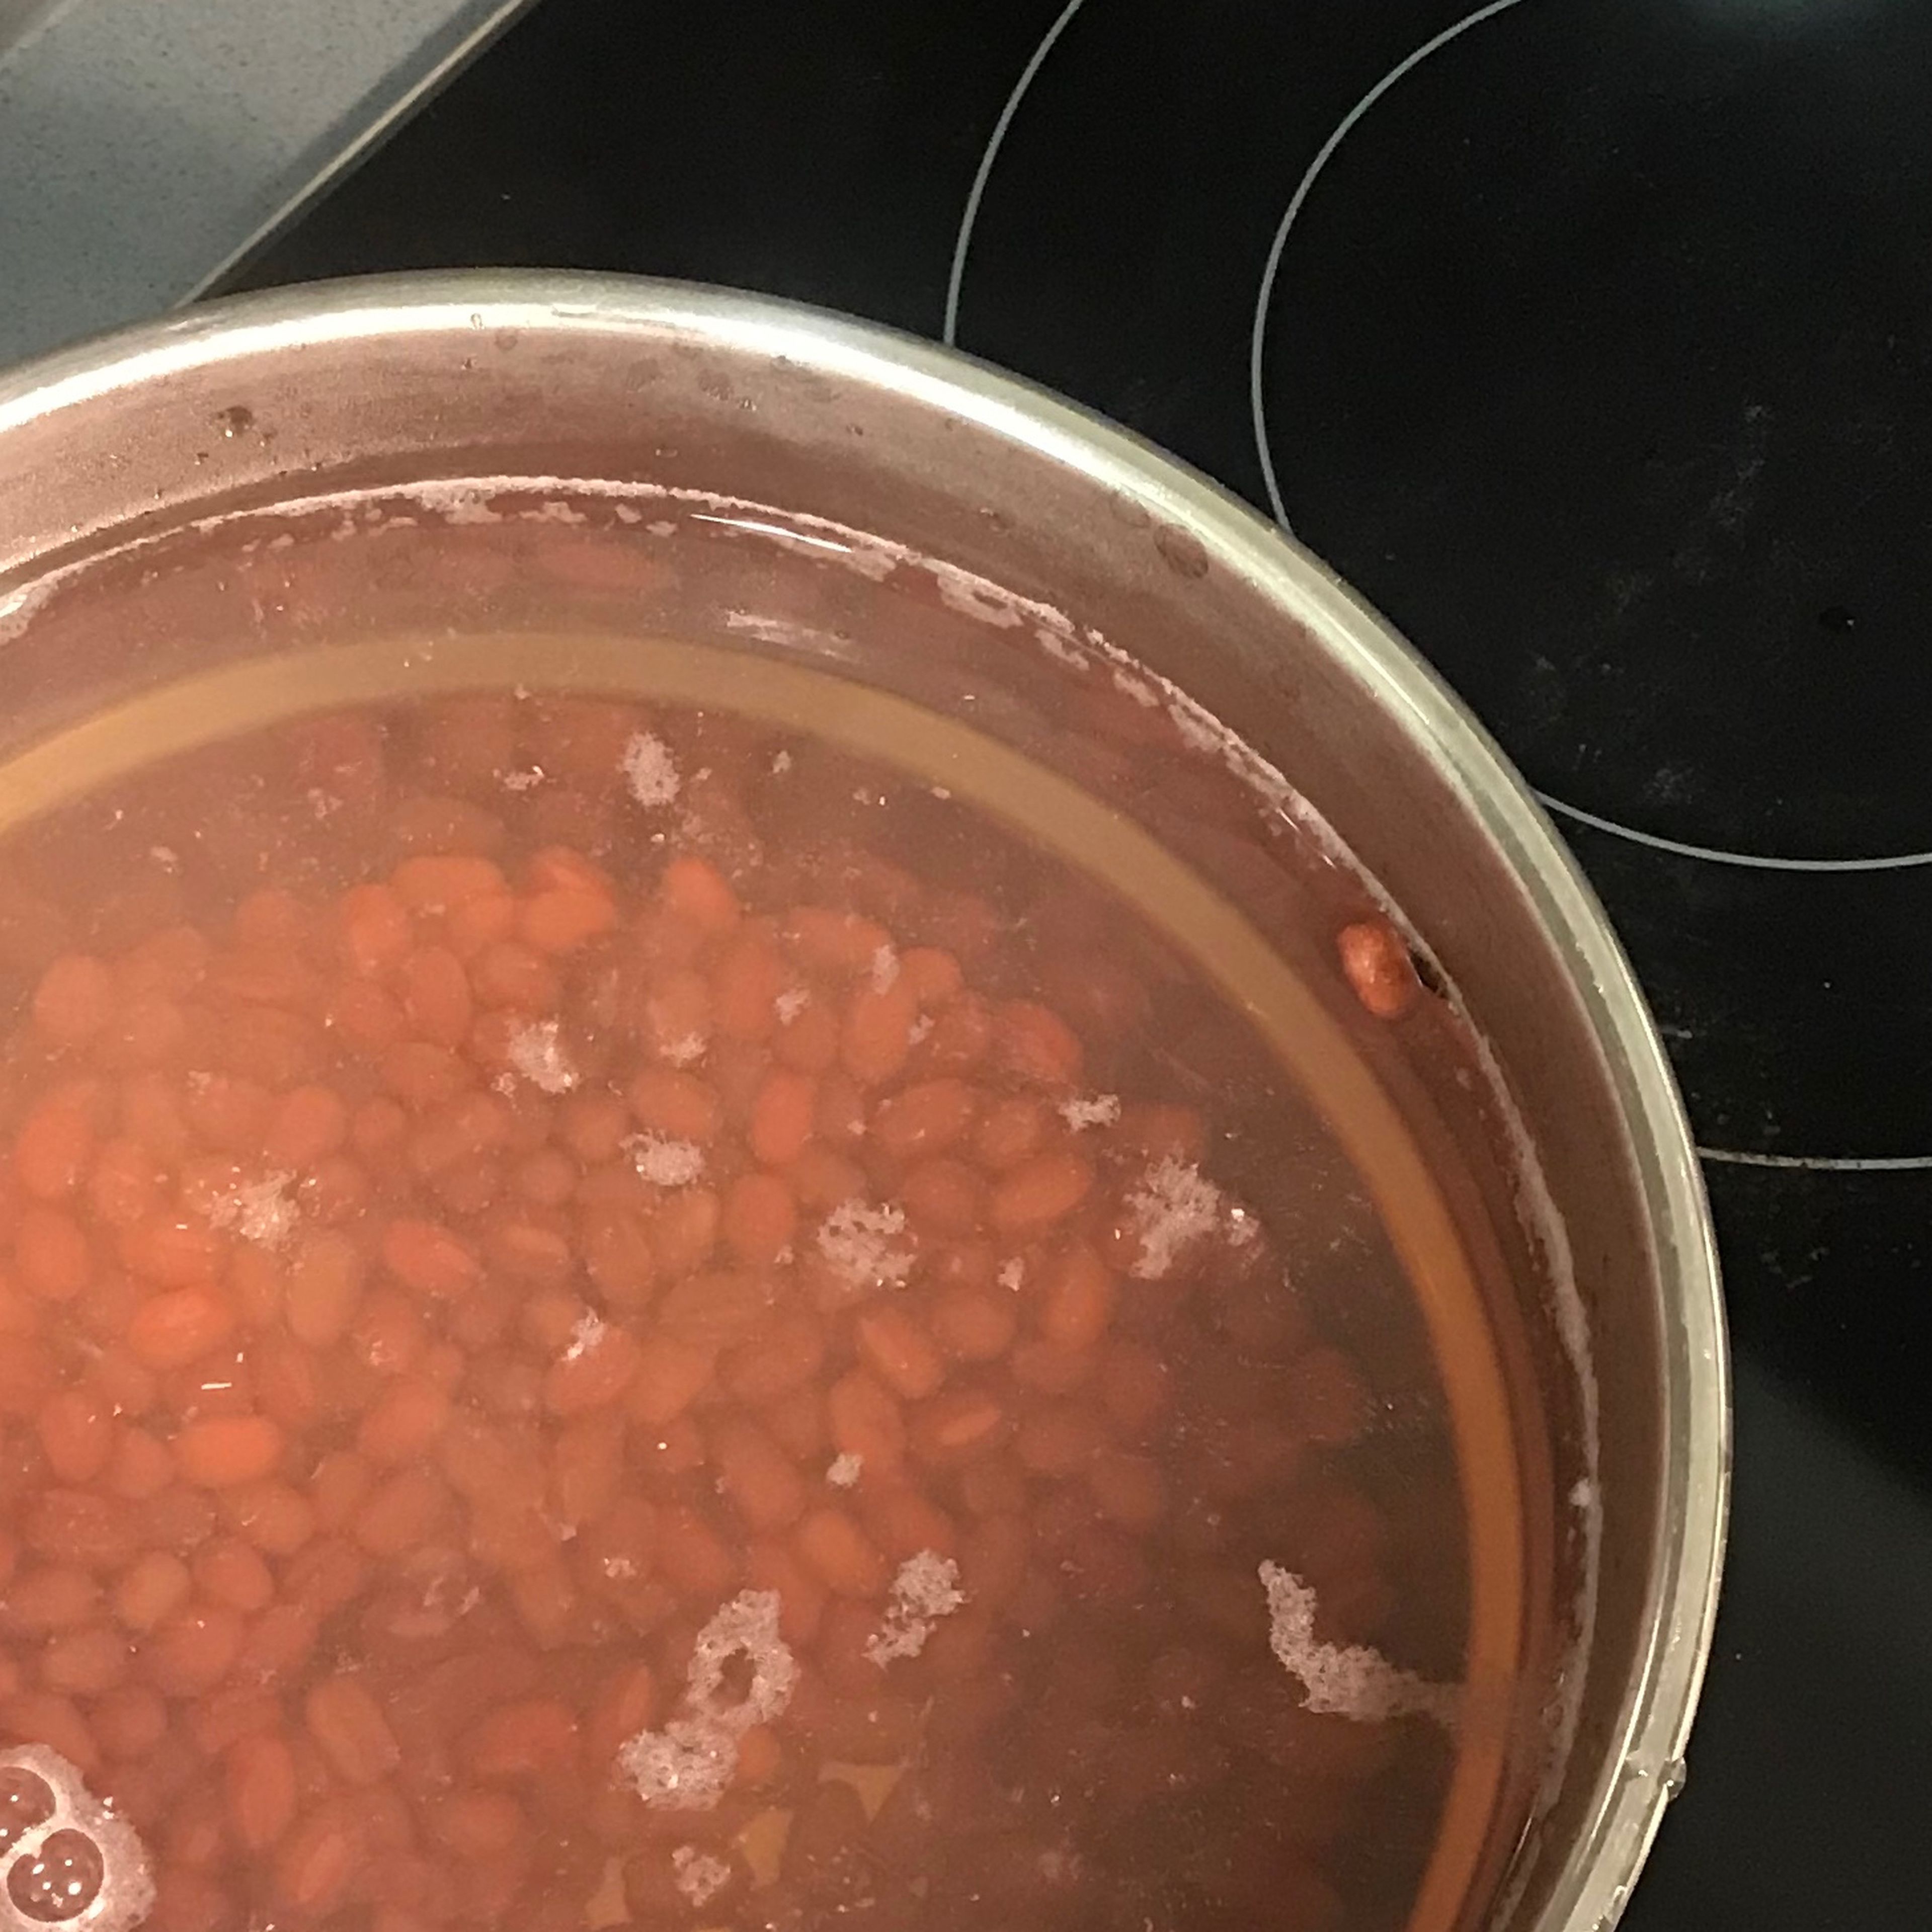 Get rid of the soaking water and rinse the beans again. Transfer all the beans to a medium-sized pot and add water. (I always use boiled water for saving time. Cold water also works, but it takes longer to cook.)